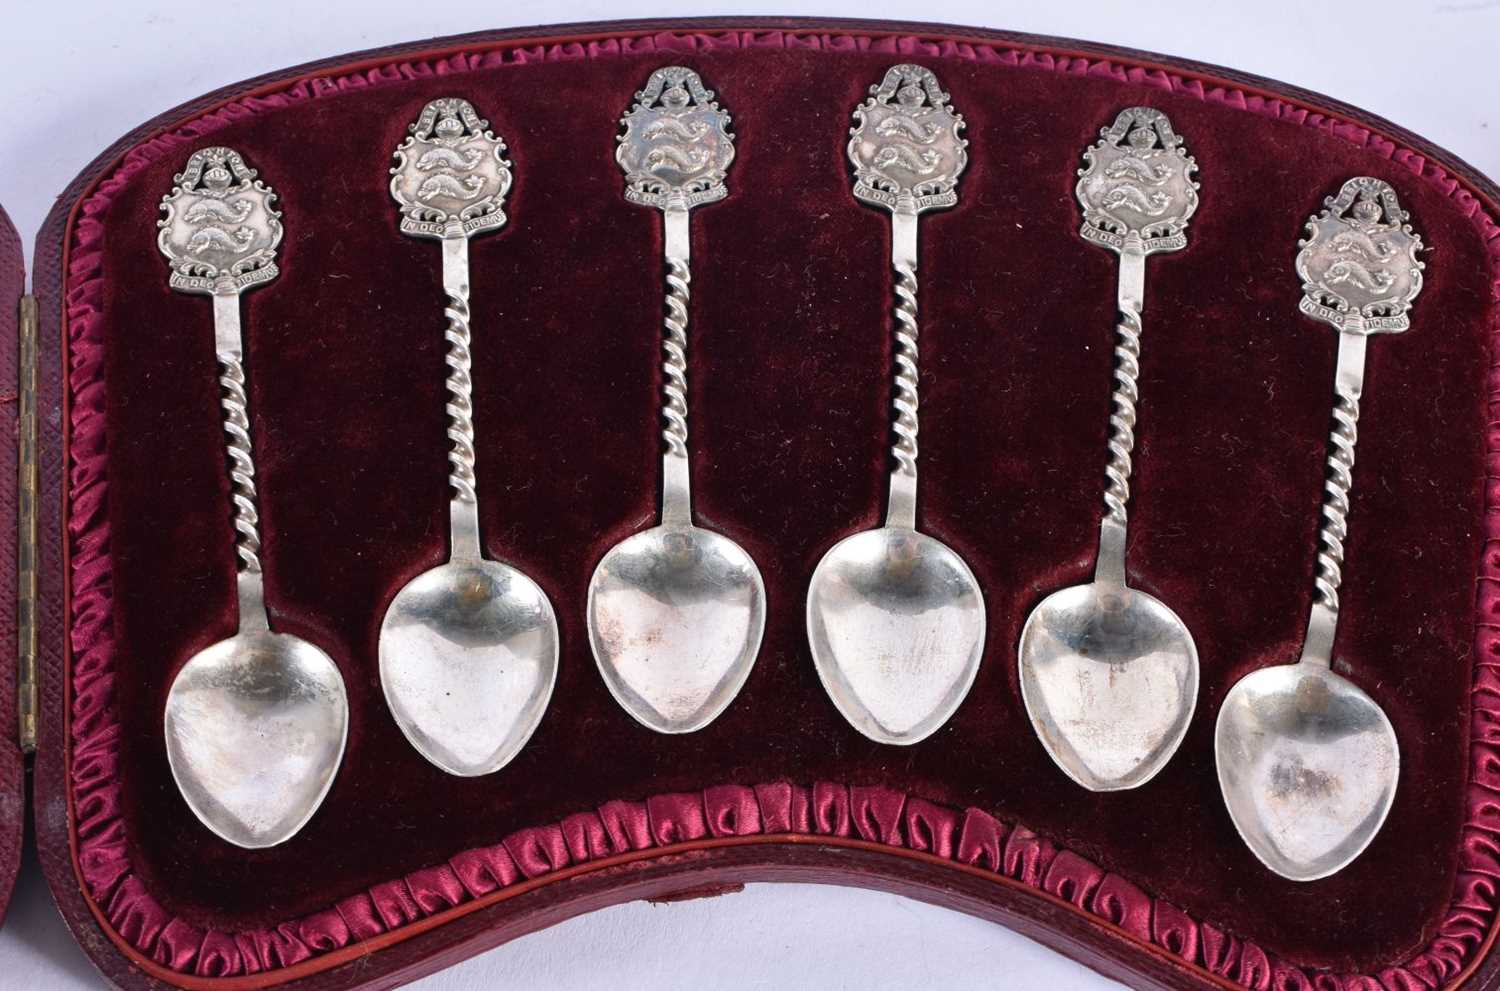 SIX VICTORIAN SILVER SPOONS. 81 grams. Chester 1893. 11.5 cm x 2.25cm. (6) - Image 2 of 6